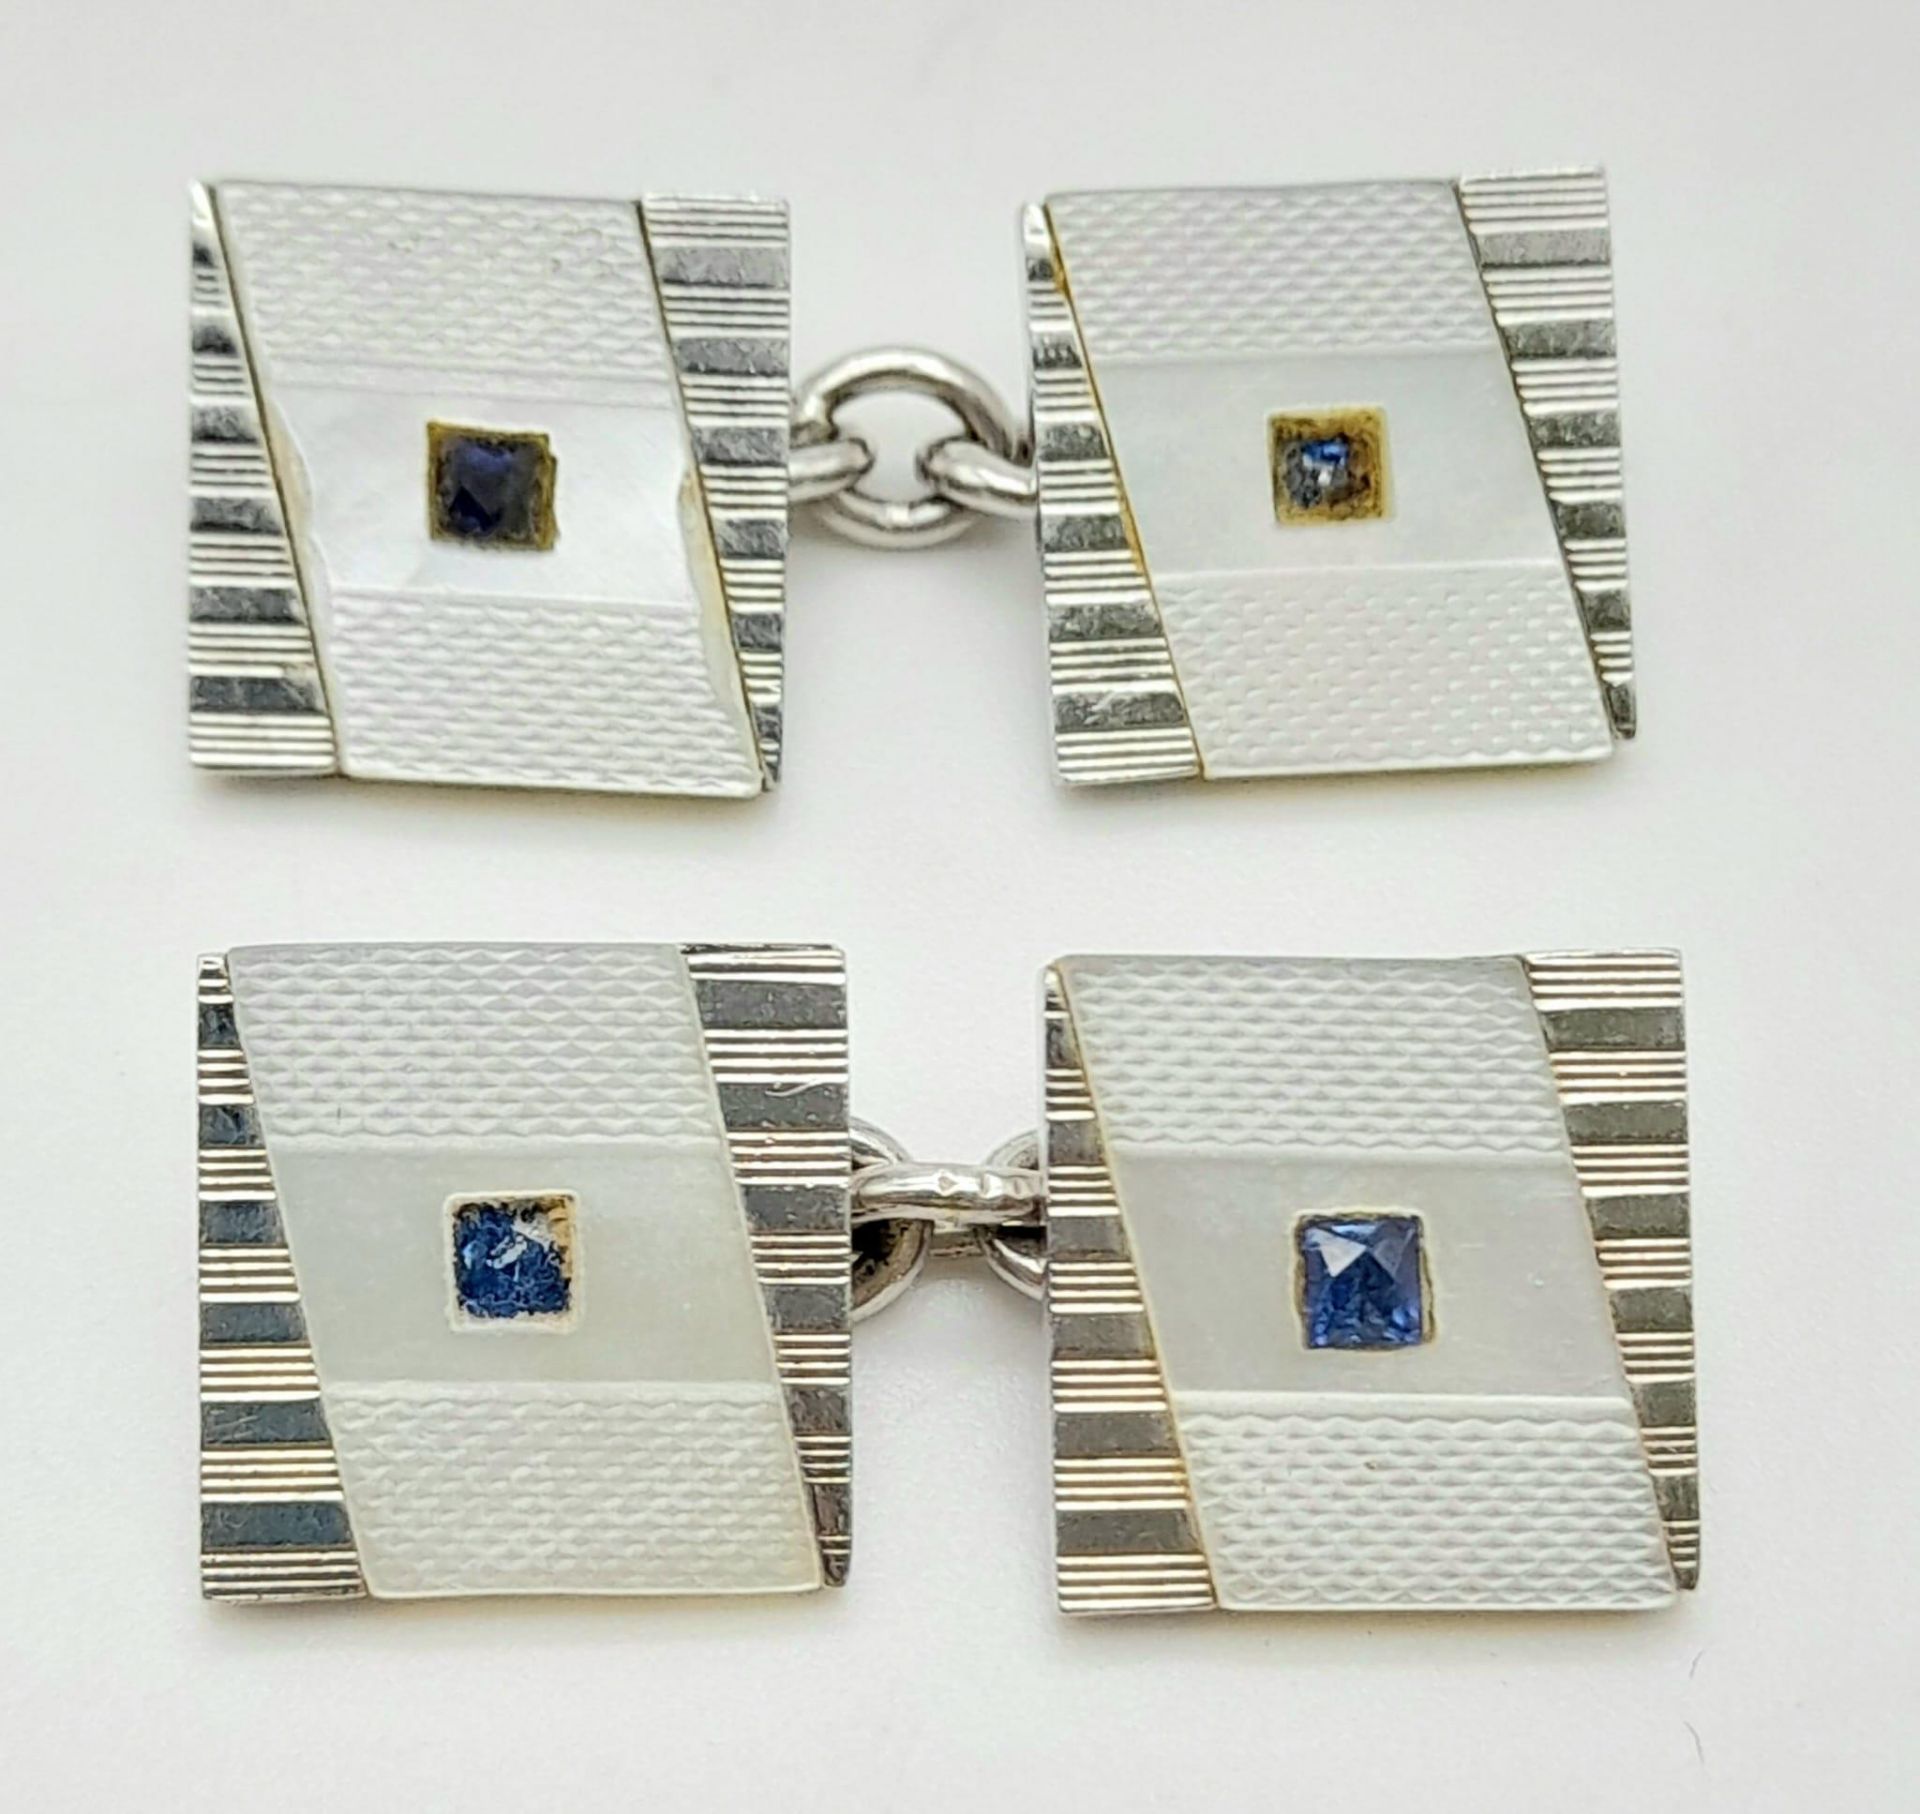 Pair of 9k white gold cufflinks, mother of pearl decorated square faces, weight 5.7g ref 13229